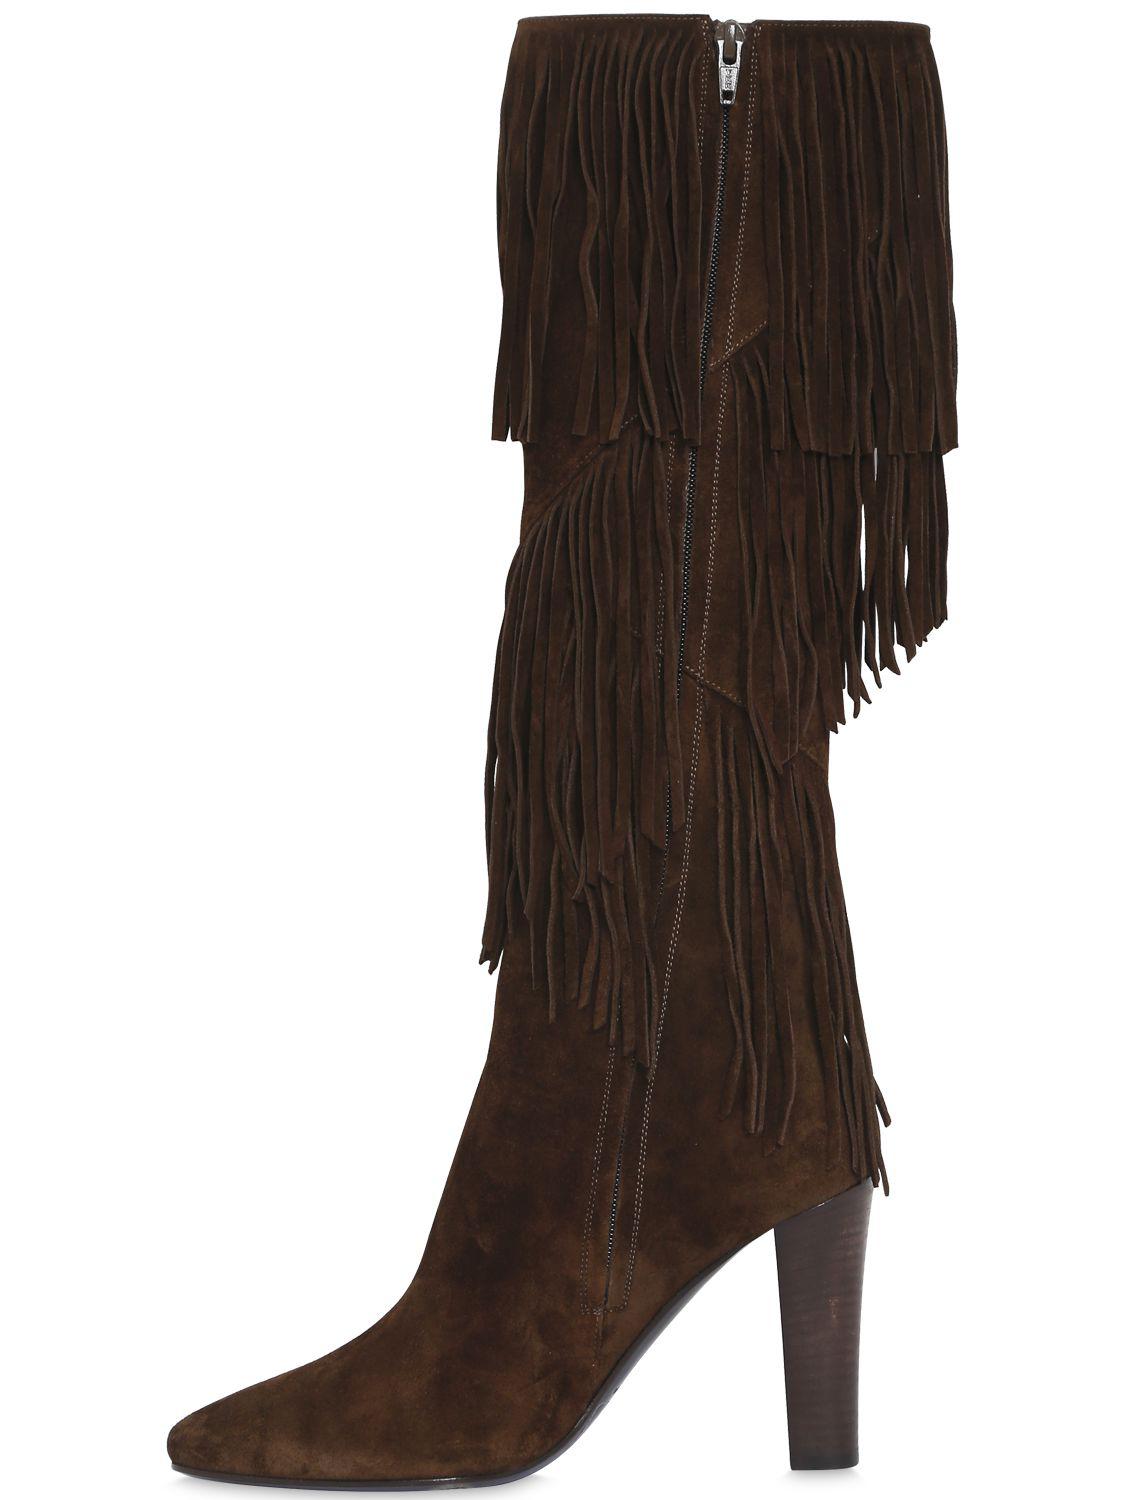 Saint Laurent Suede 'lily' Fringe Tall Boot in Light Brown (Brown) - Lyst